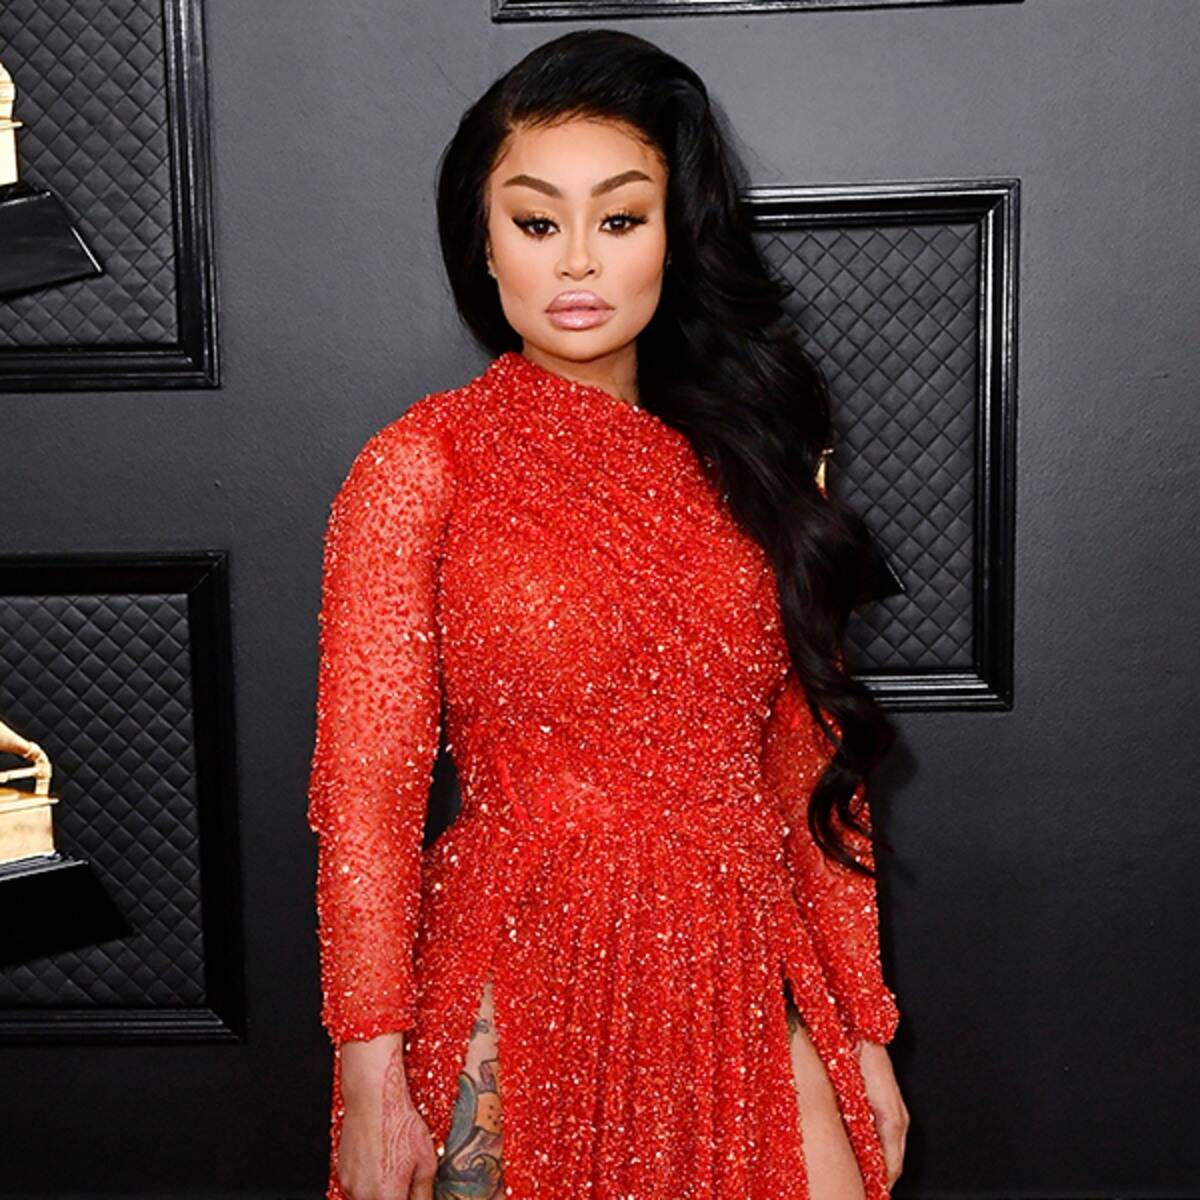 Blac Chyna's Recent Video Freaks Fans Out: 'What Did You Do To Yourself?'